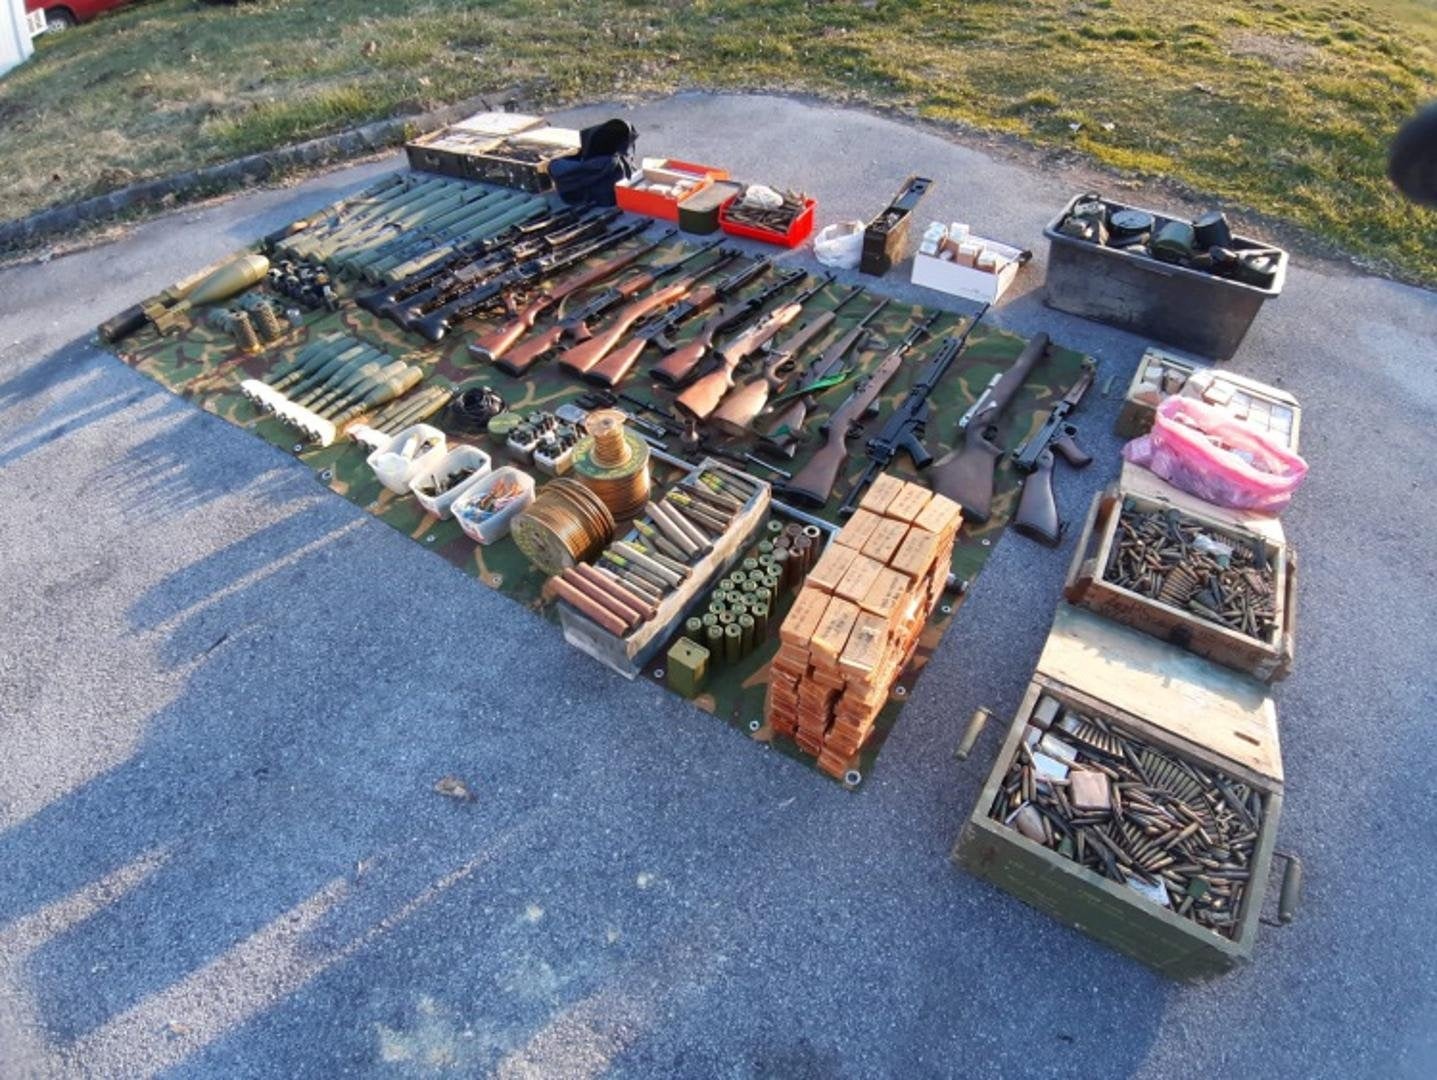 Croatian Man Turns in His Entire Arsenal to the Police